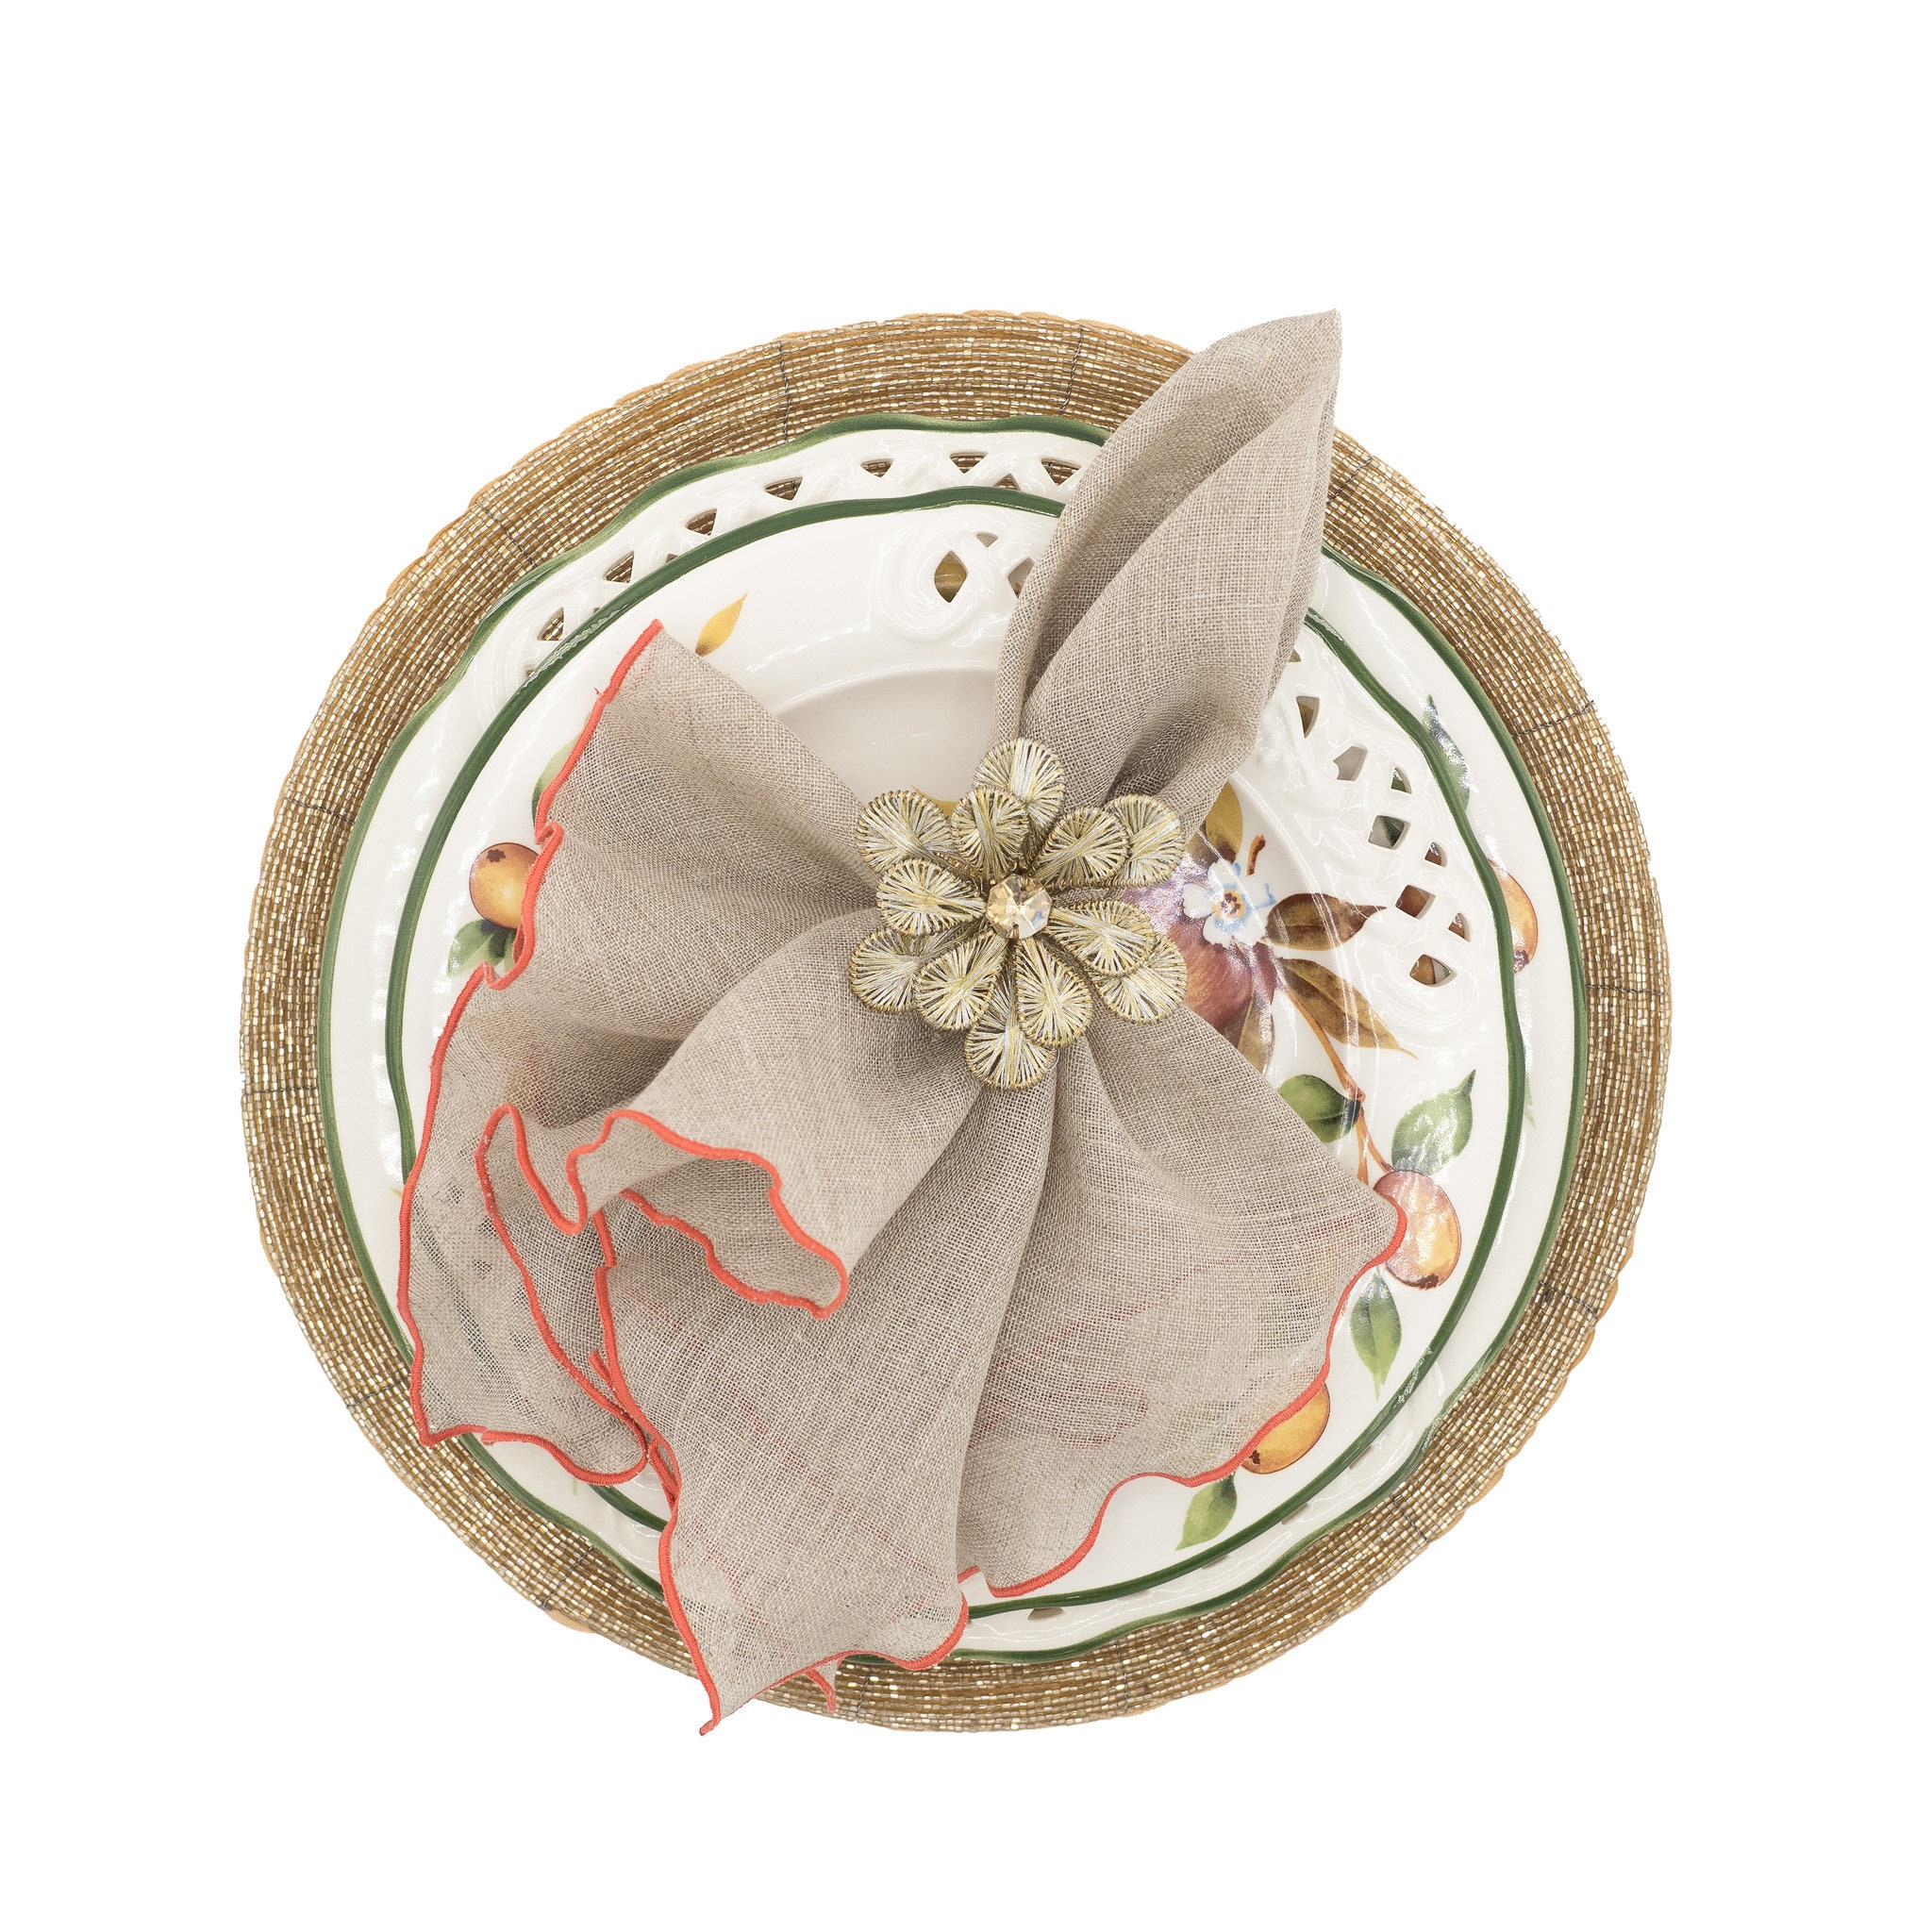 Including Linen Napkin Rings. Natural Linen Napkins With Gold Stitch Edges 21 X 21